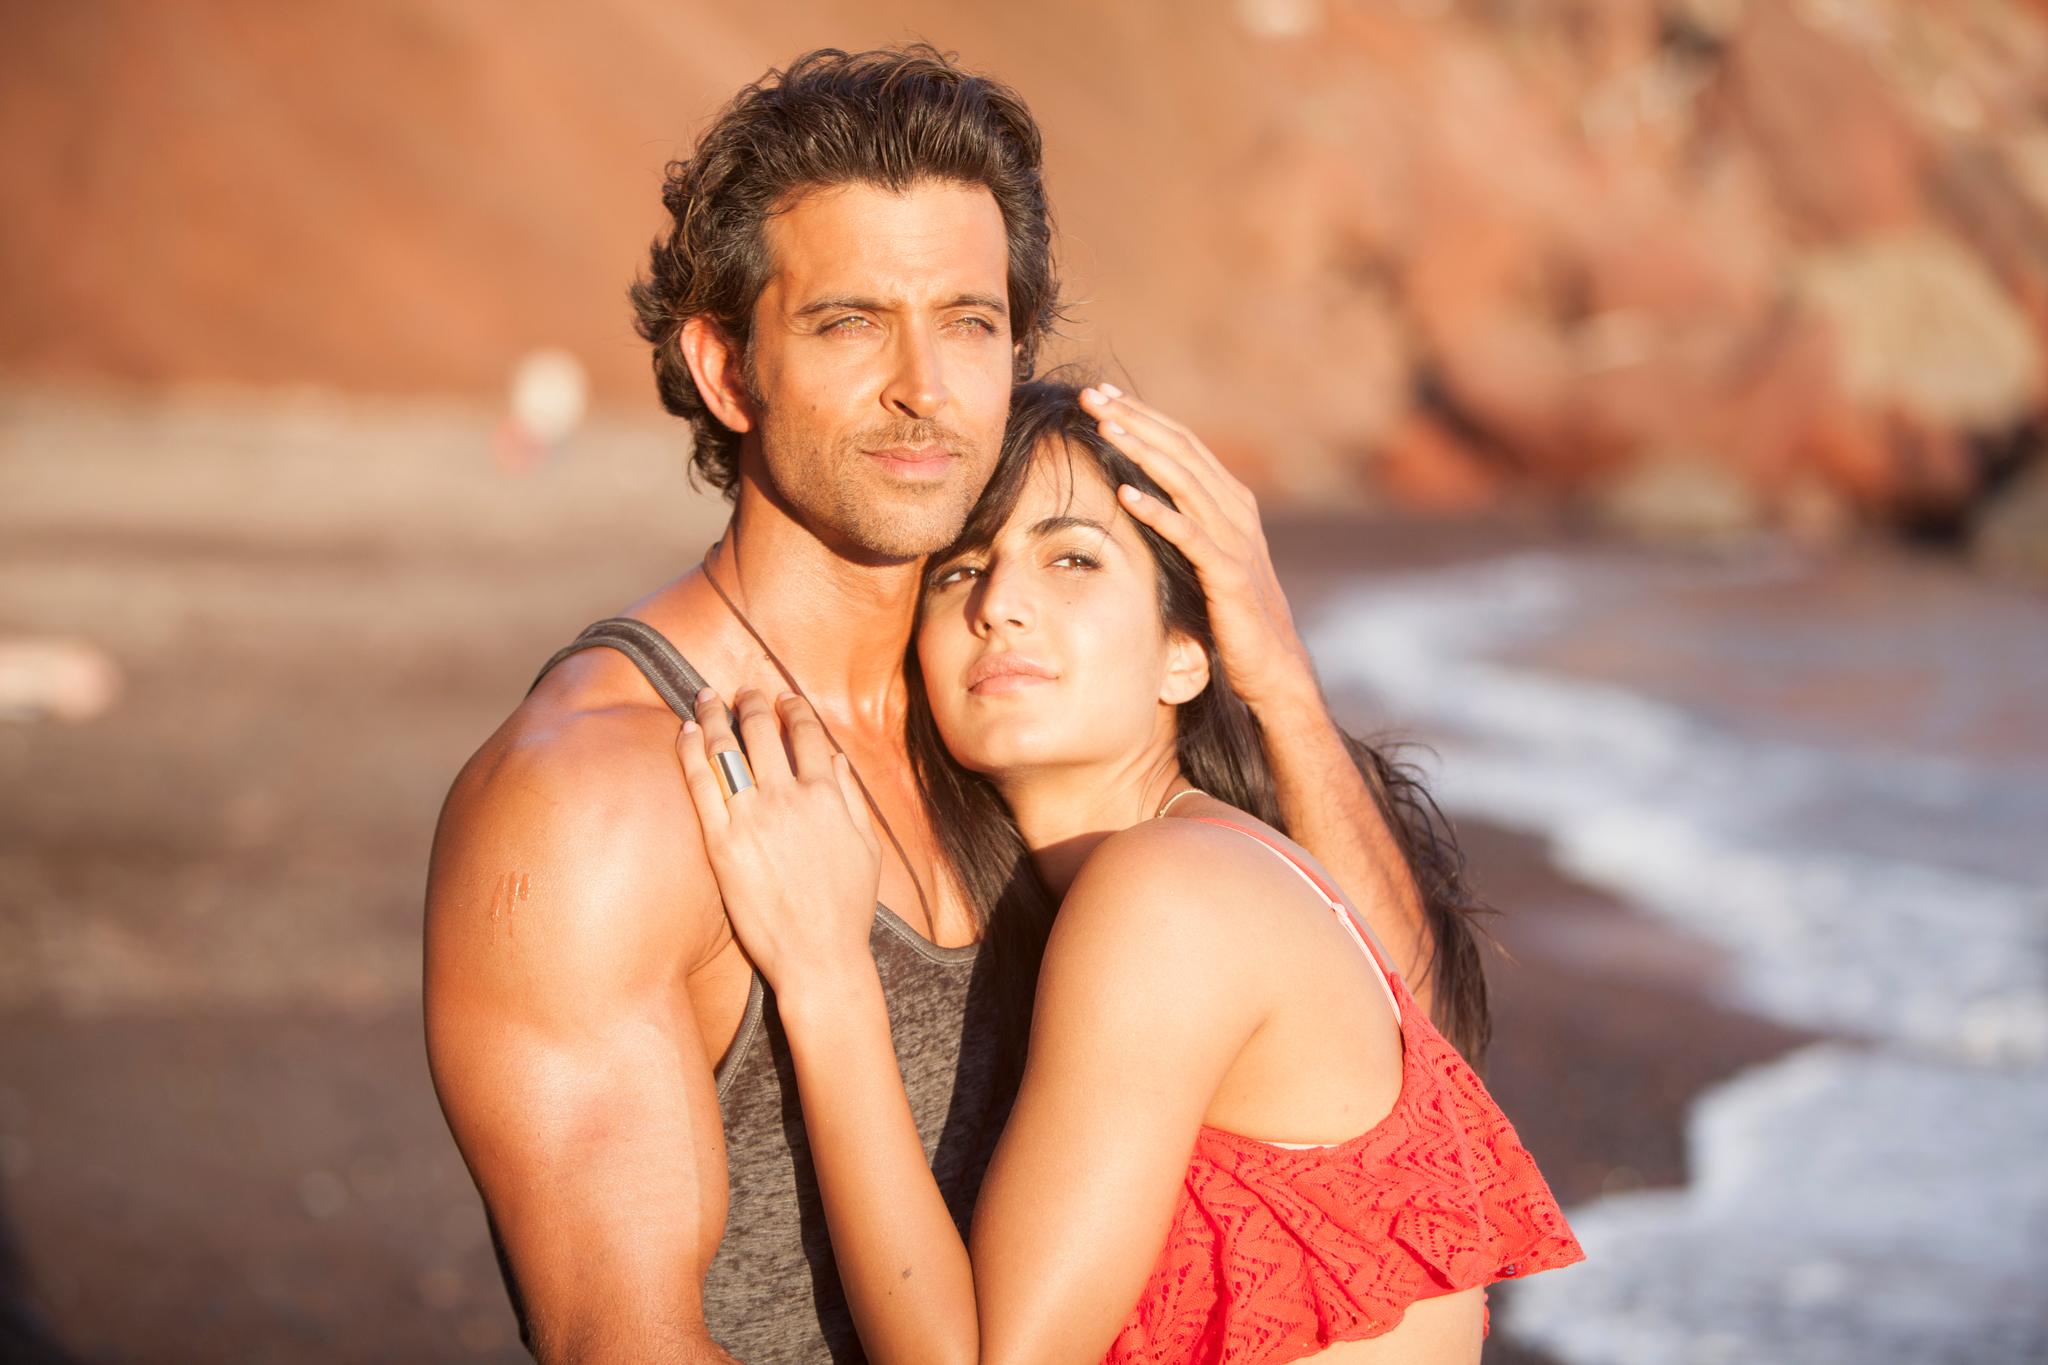 When Hrithik Roshan and Katrina Kaif teamed up, it was pure magic. From the soulful journey of Zindagi Na Milegi Dobara to the action-packed romance of Bang Bang, their on-screen chemistry was captivating.